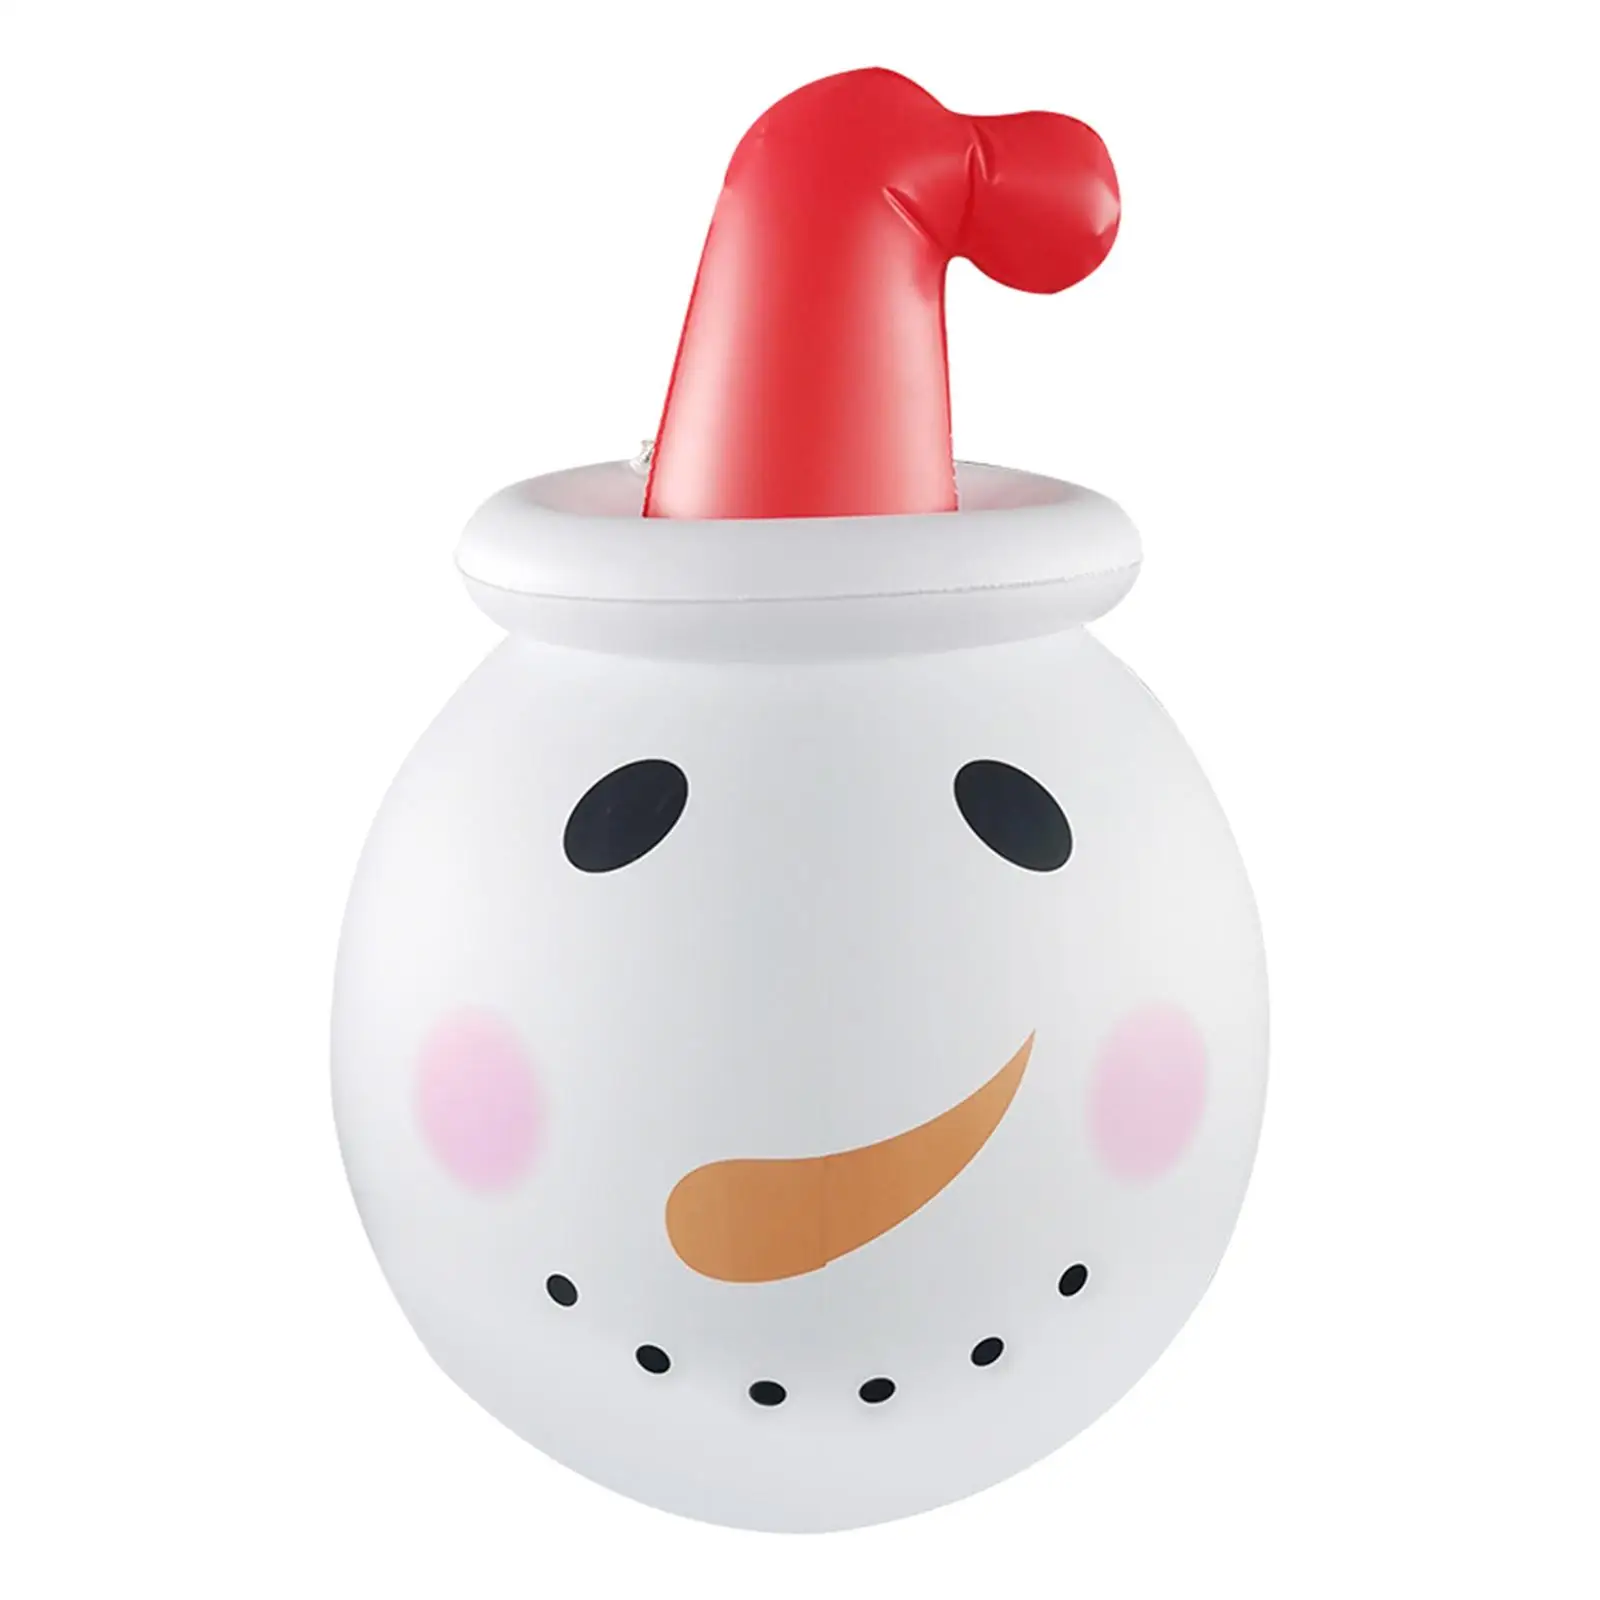 Christmas Inflatable Snowman Ornament Christmas Decoration Xmas Snowball Decor for Indoor and Outdoor Garden Home Year